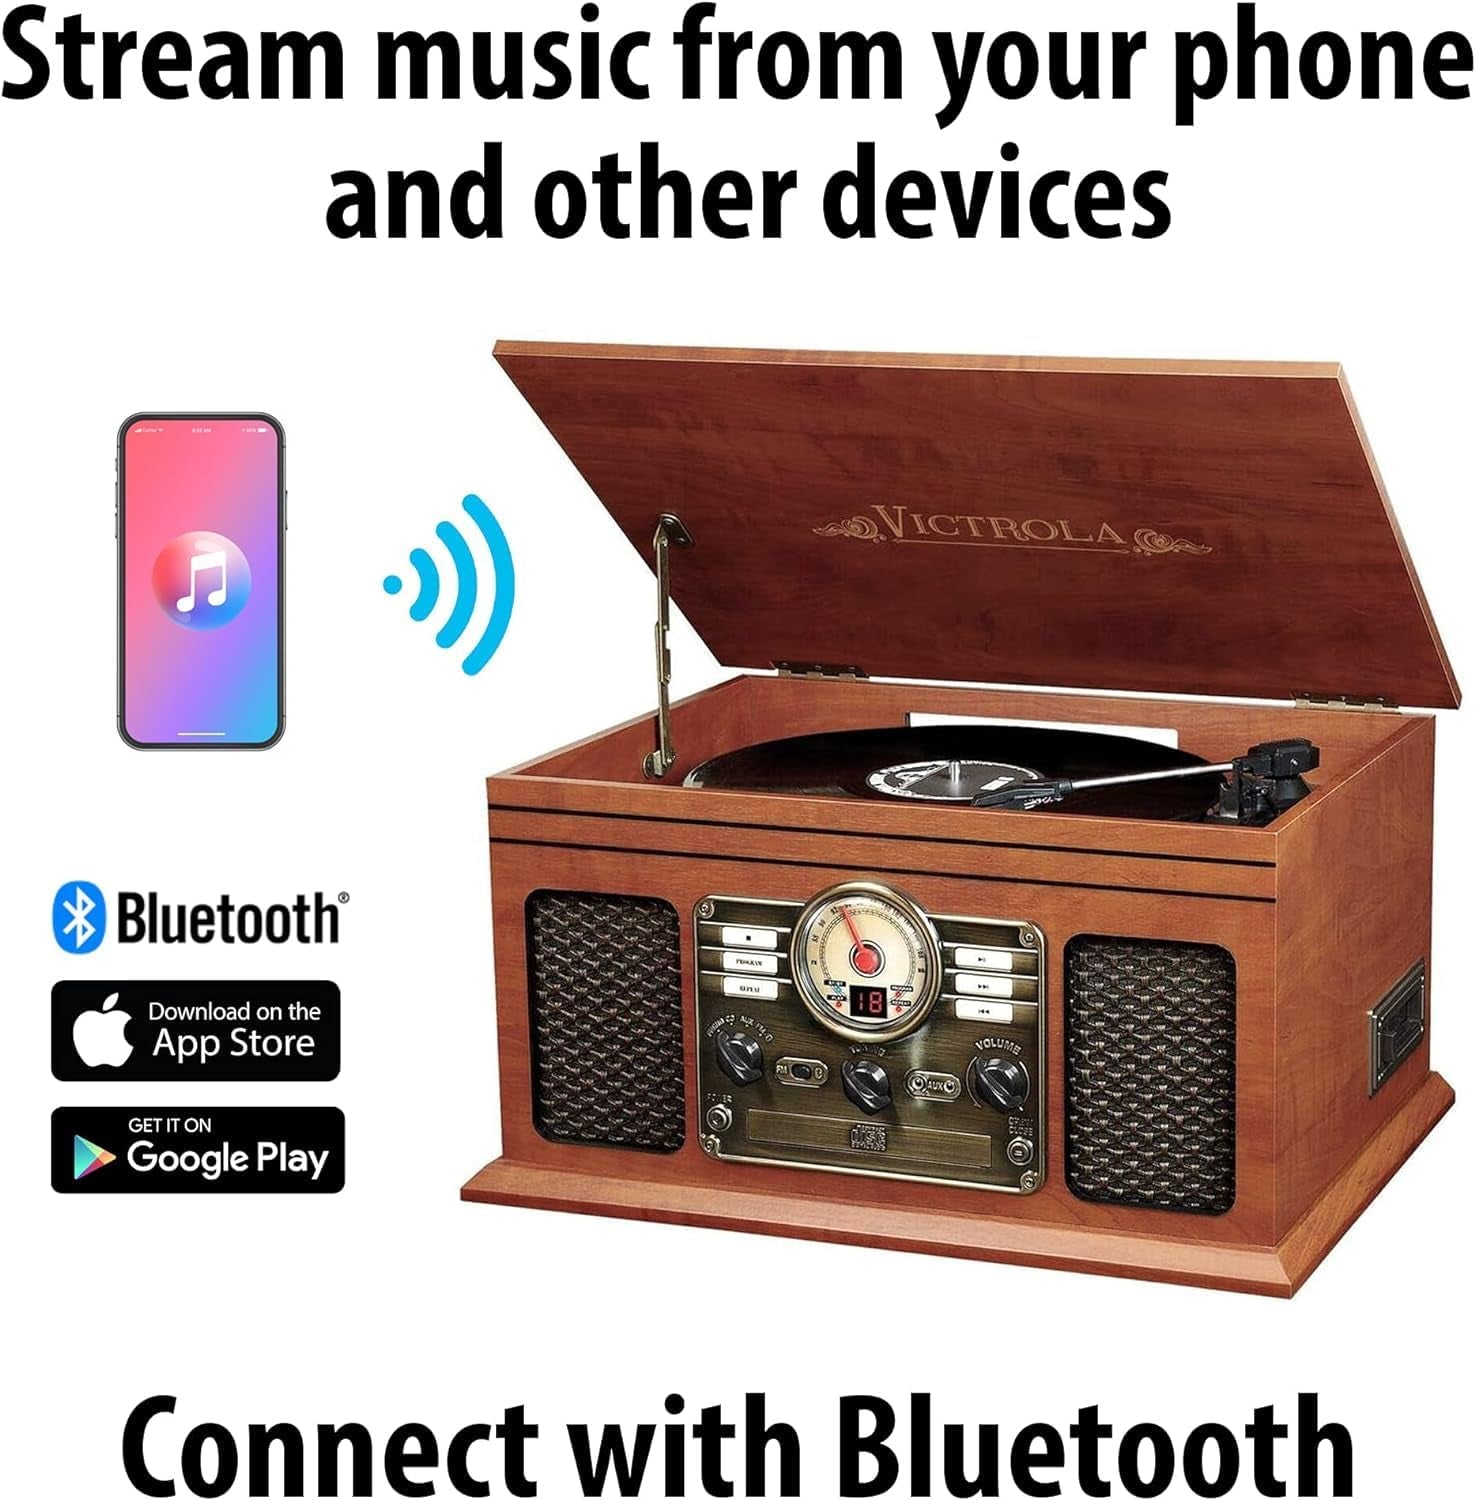 Nostalgic 6-In-1 Bluetooth Record Player & Multimedia Center with Built-In Speakers - 3-Speed Turntable, CD & Cassette Player, FM Radio | Wireless Music Streaming | Mahogany